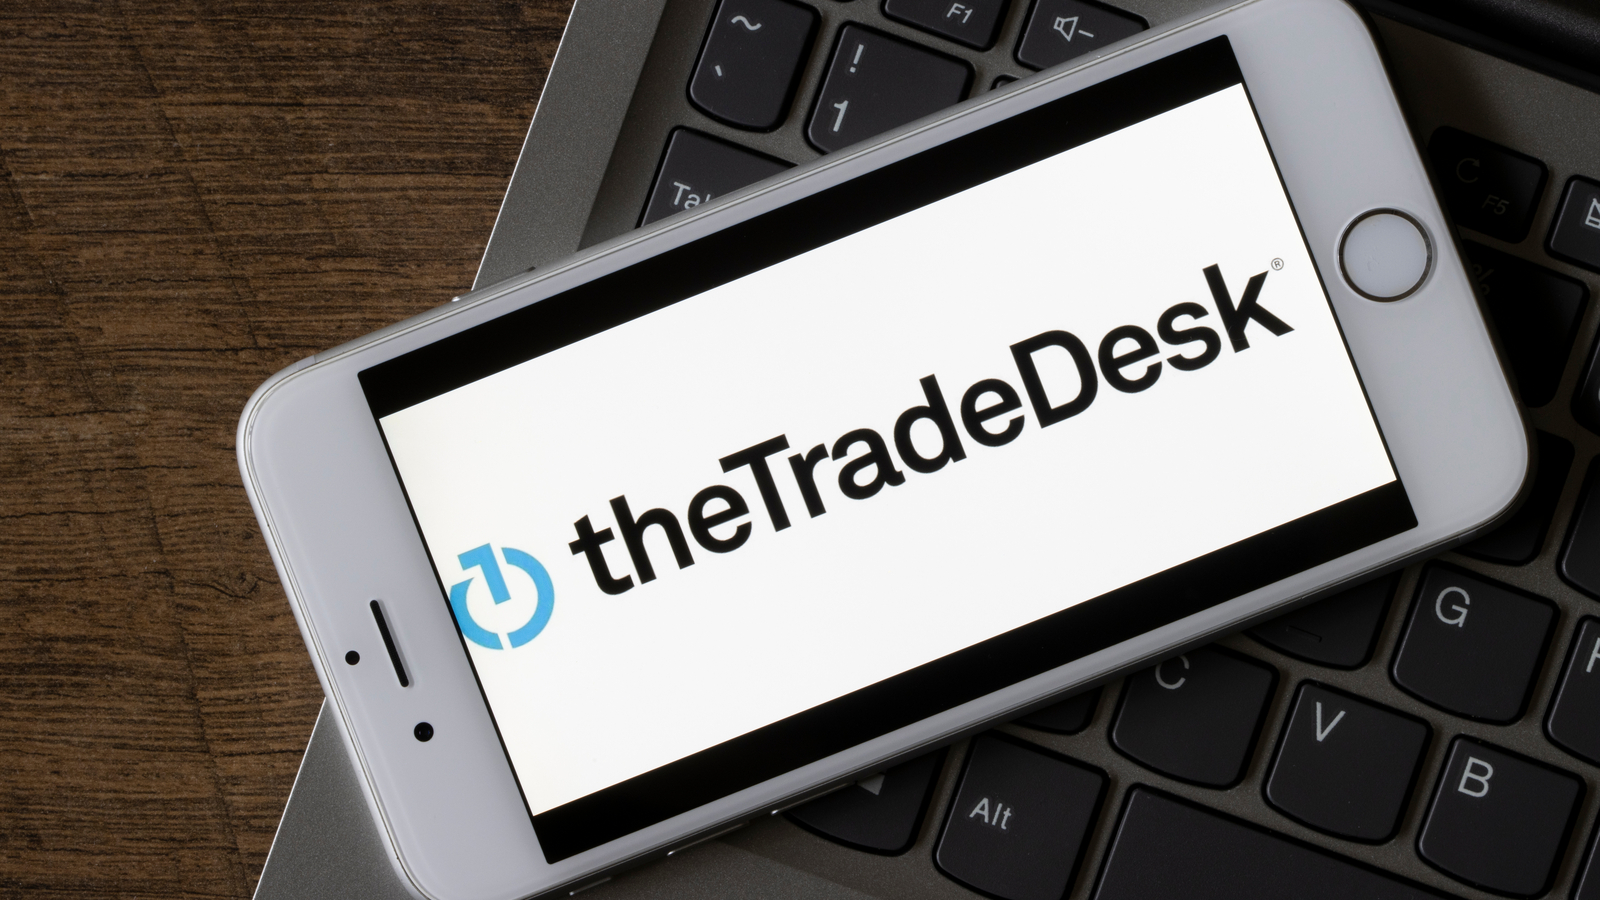 The logo for The Trade Desk is displayed on a smart phone representing TTD stock.